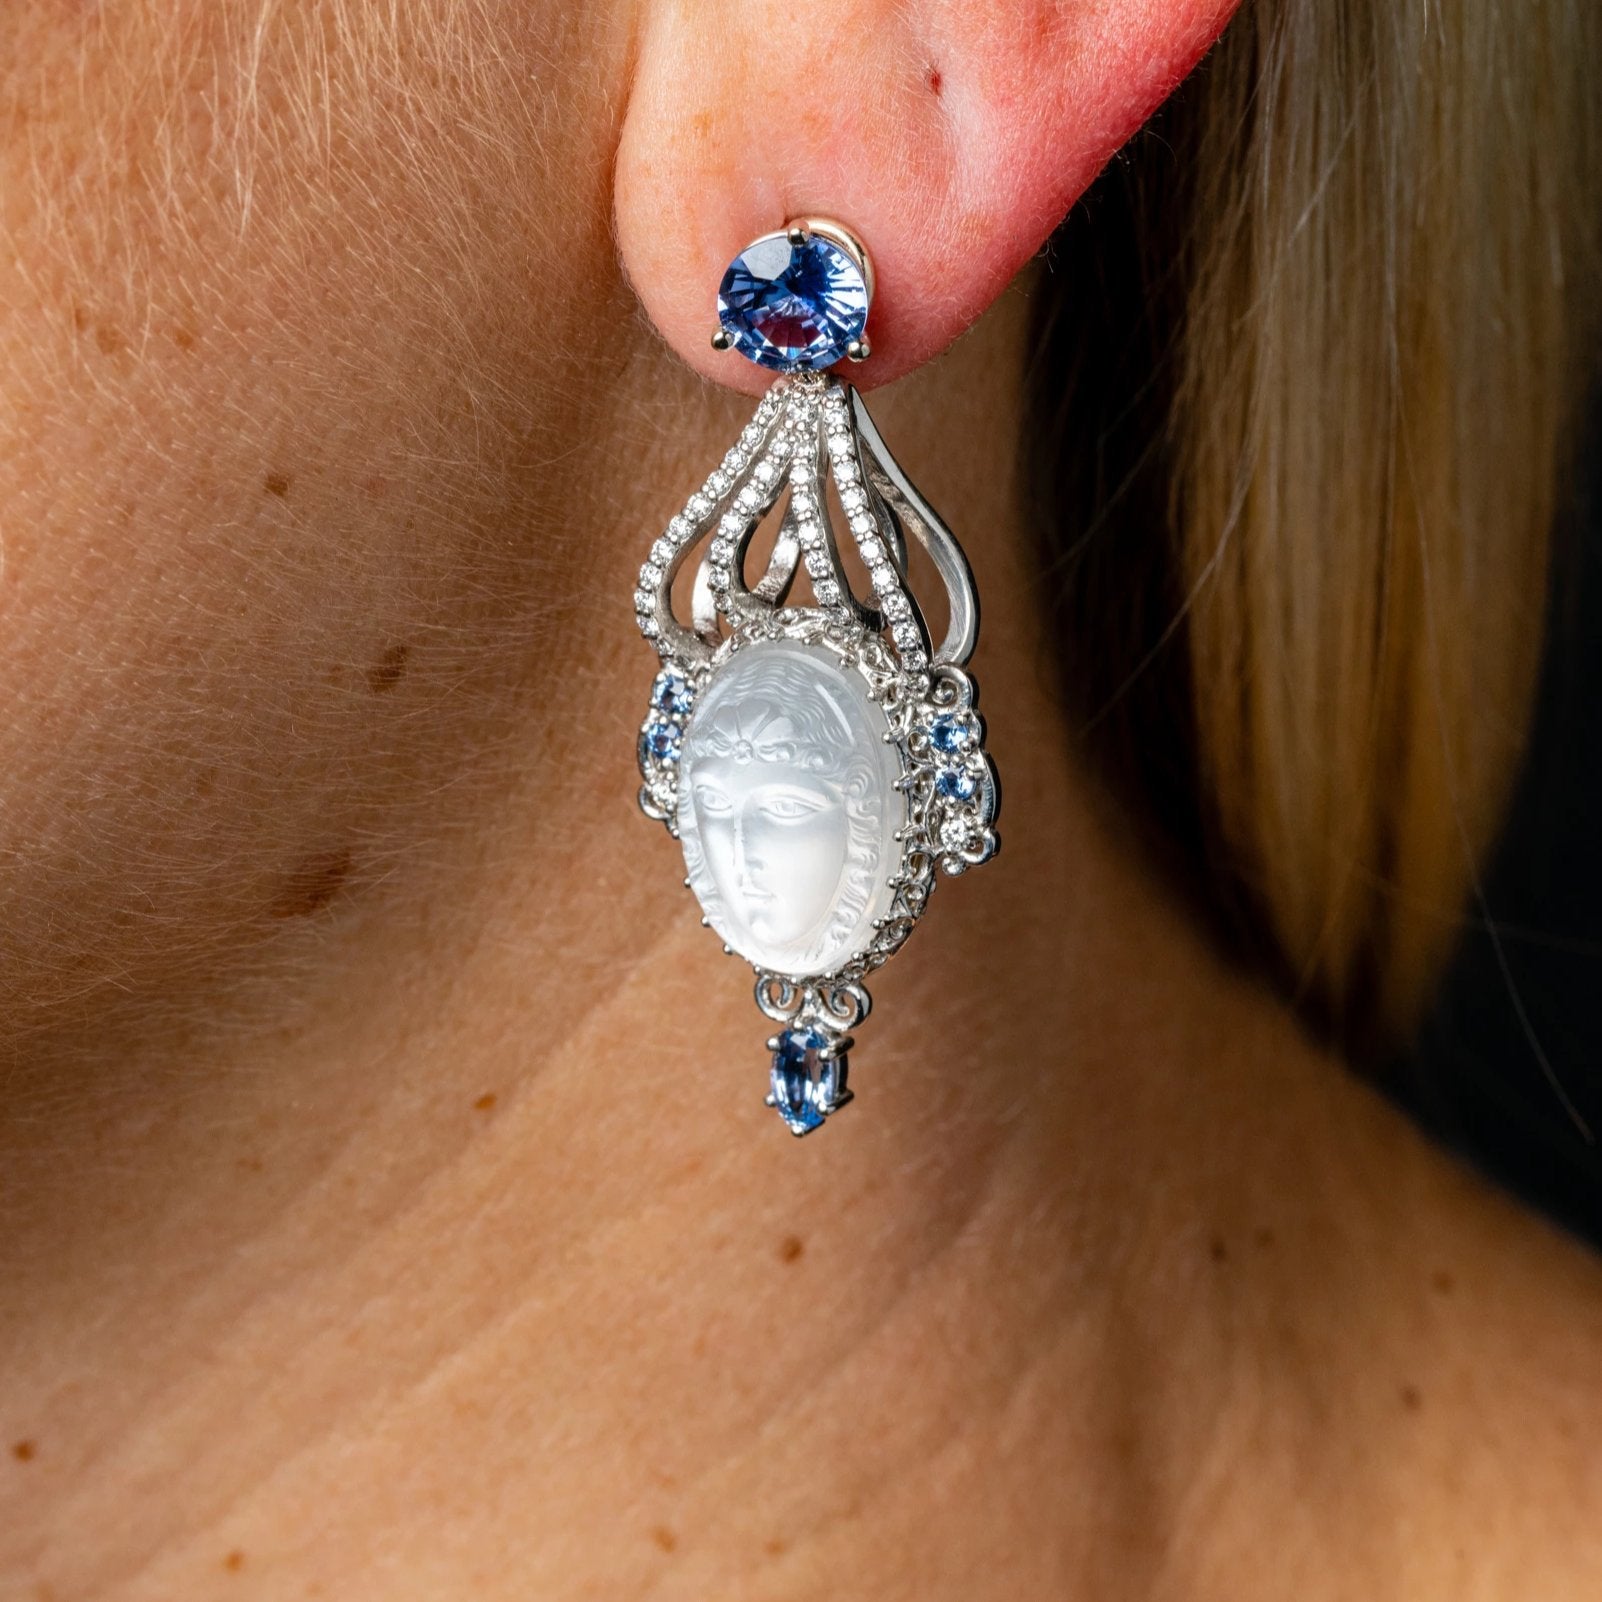 Custom Jewelry, Lady in the moonstone jackets, blue sapphire studs, llyn strong, Greenville, South Carolina